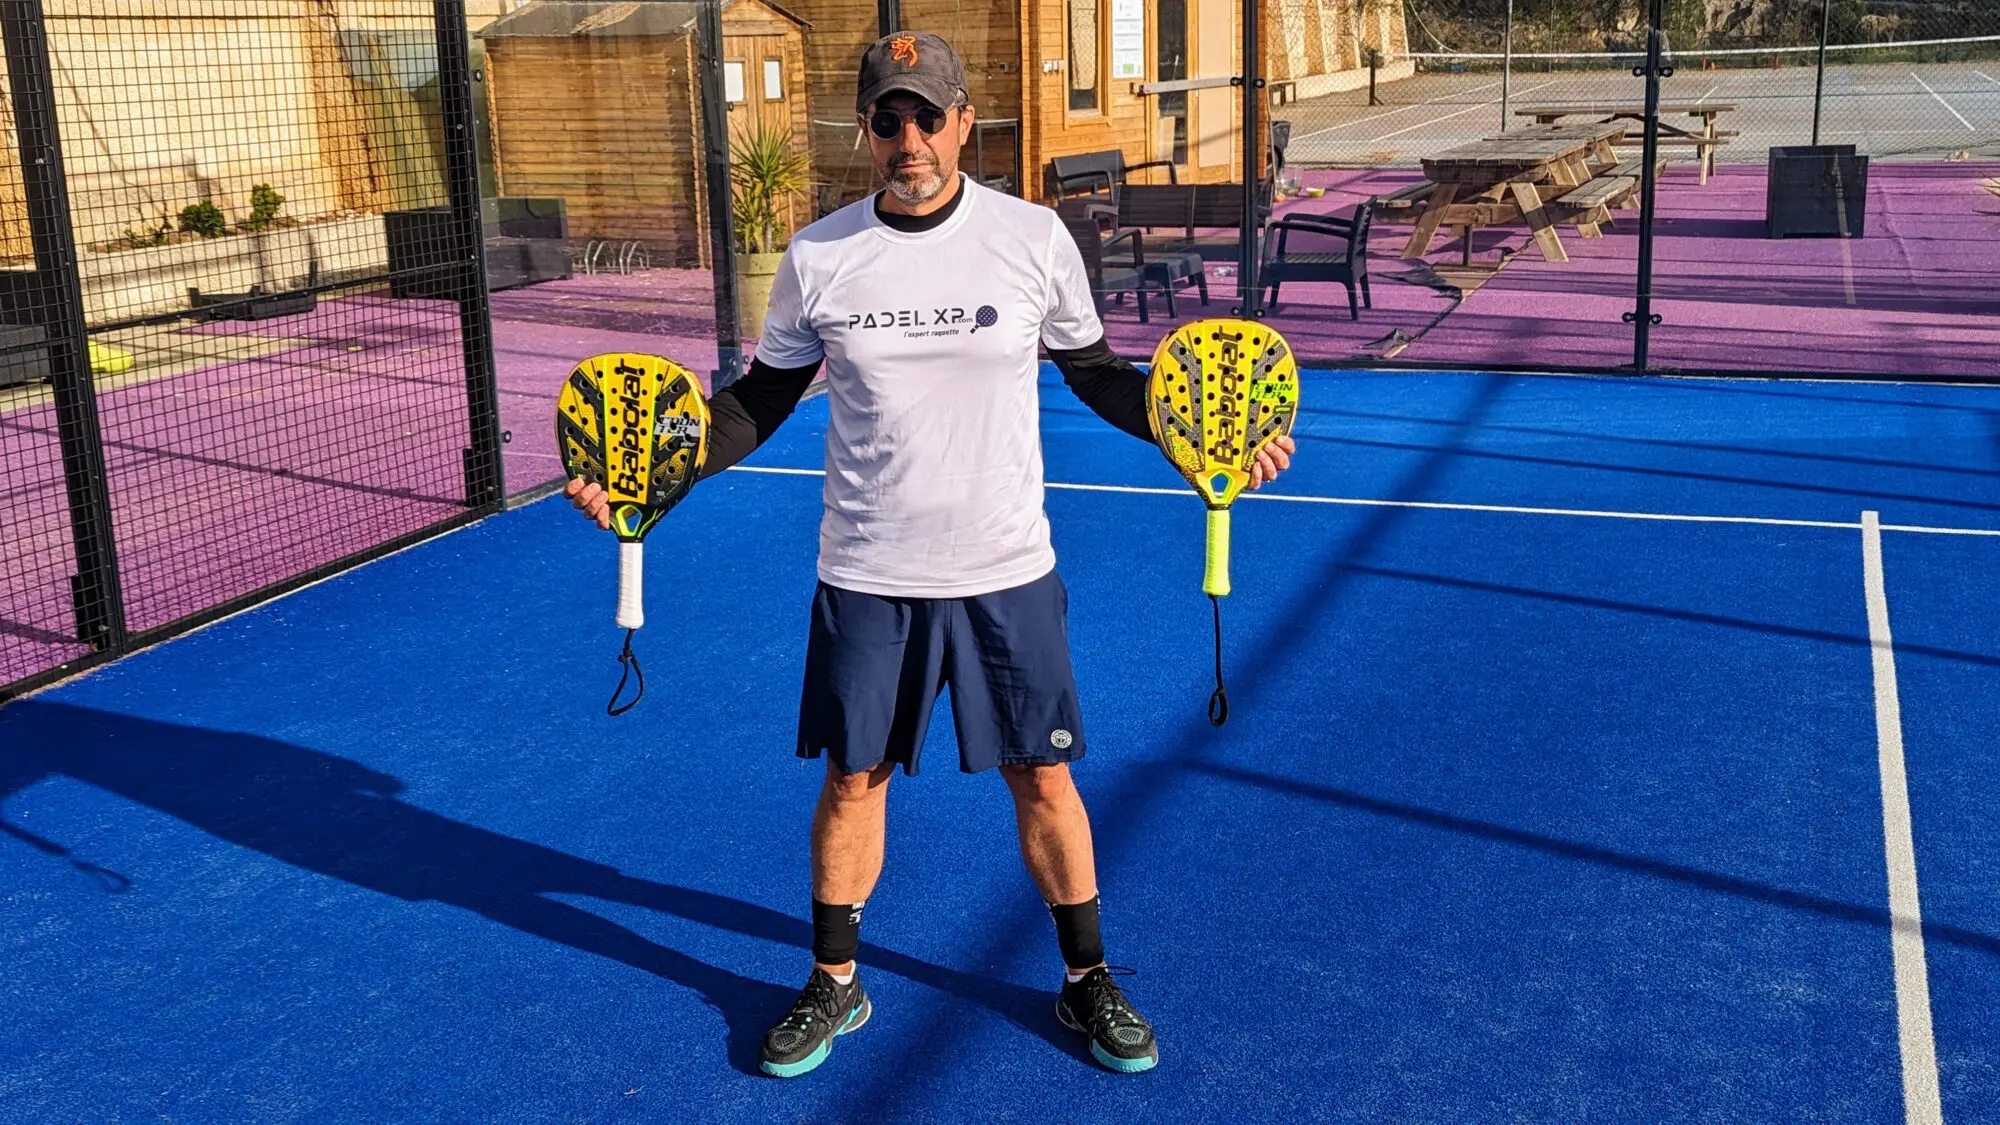 Stéphane Penso explains to us the differences between Babolat Viper and Veron